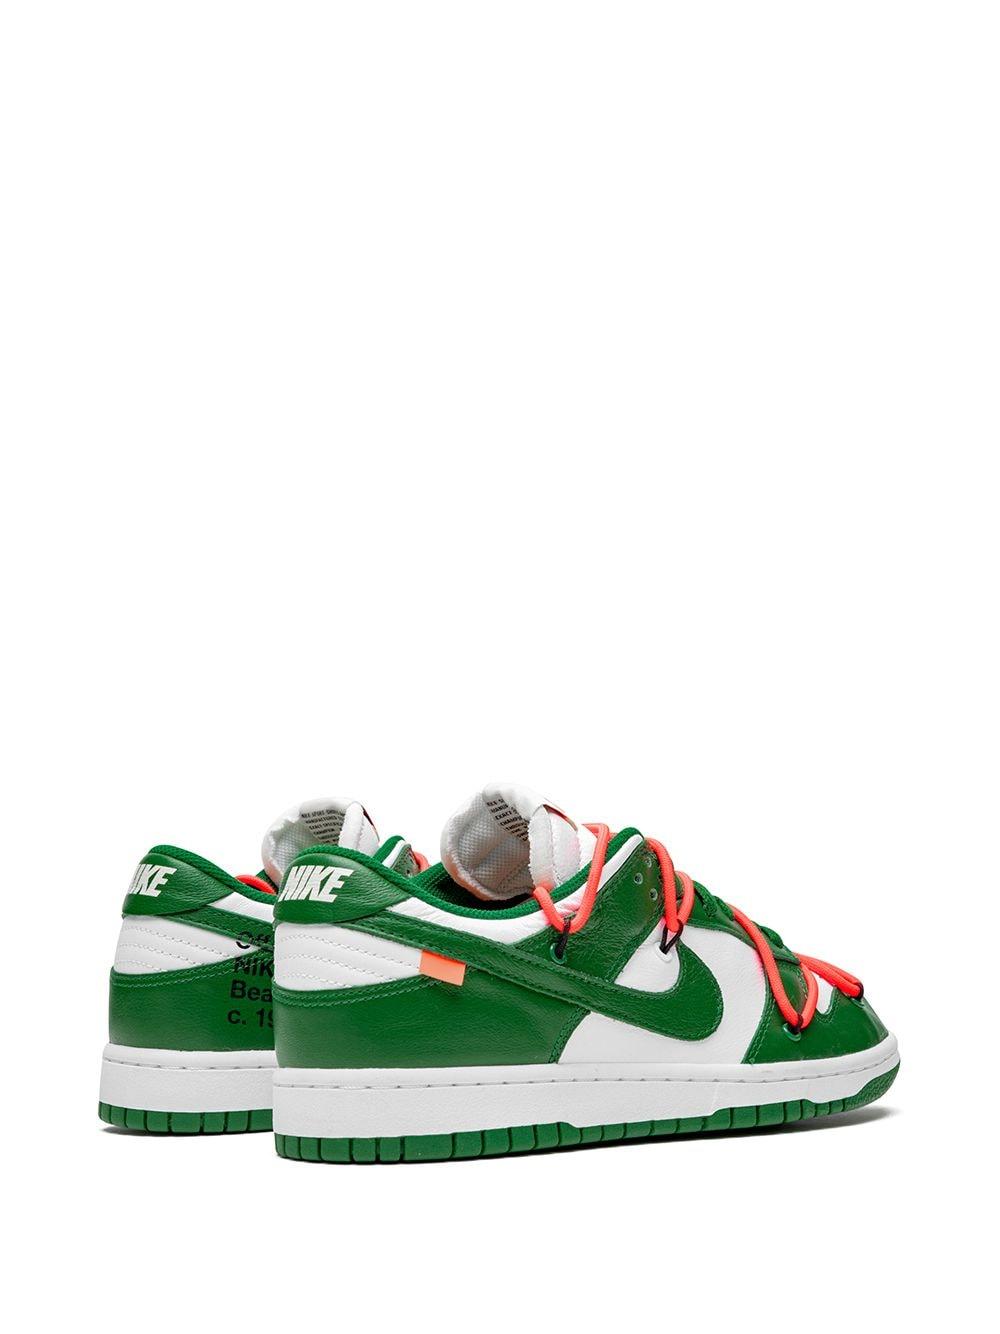 NIKE X OFF-WHITE Lace Dunk Low Sneakers in Green for Men - Lyst